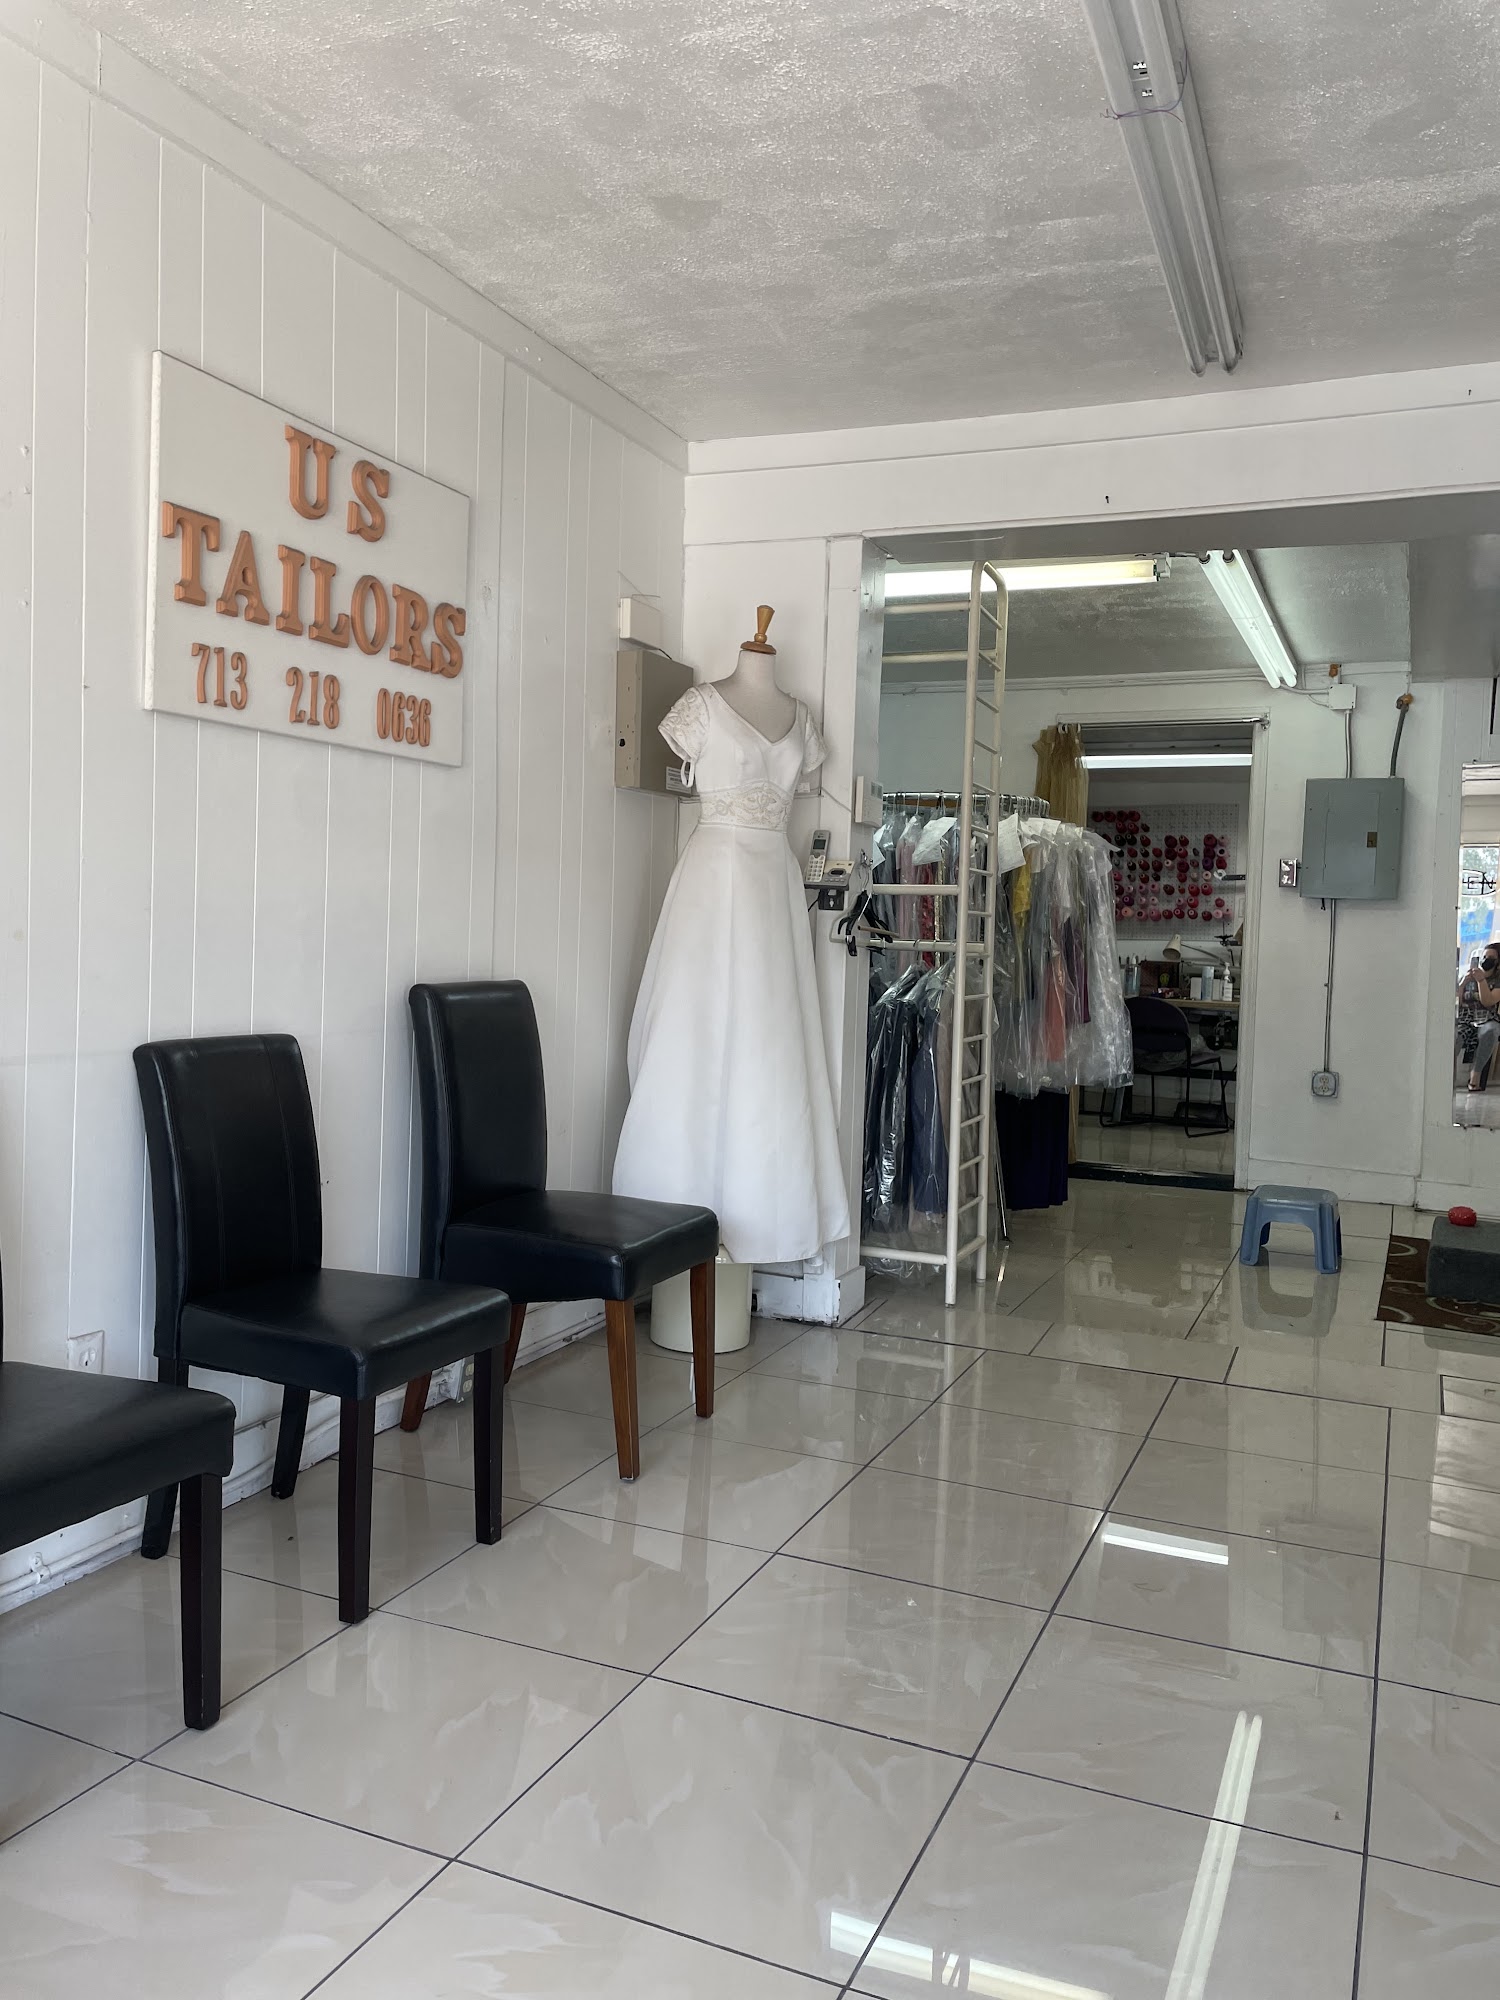 US Tailor & Alteration